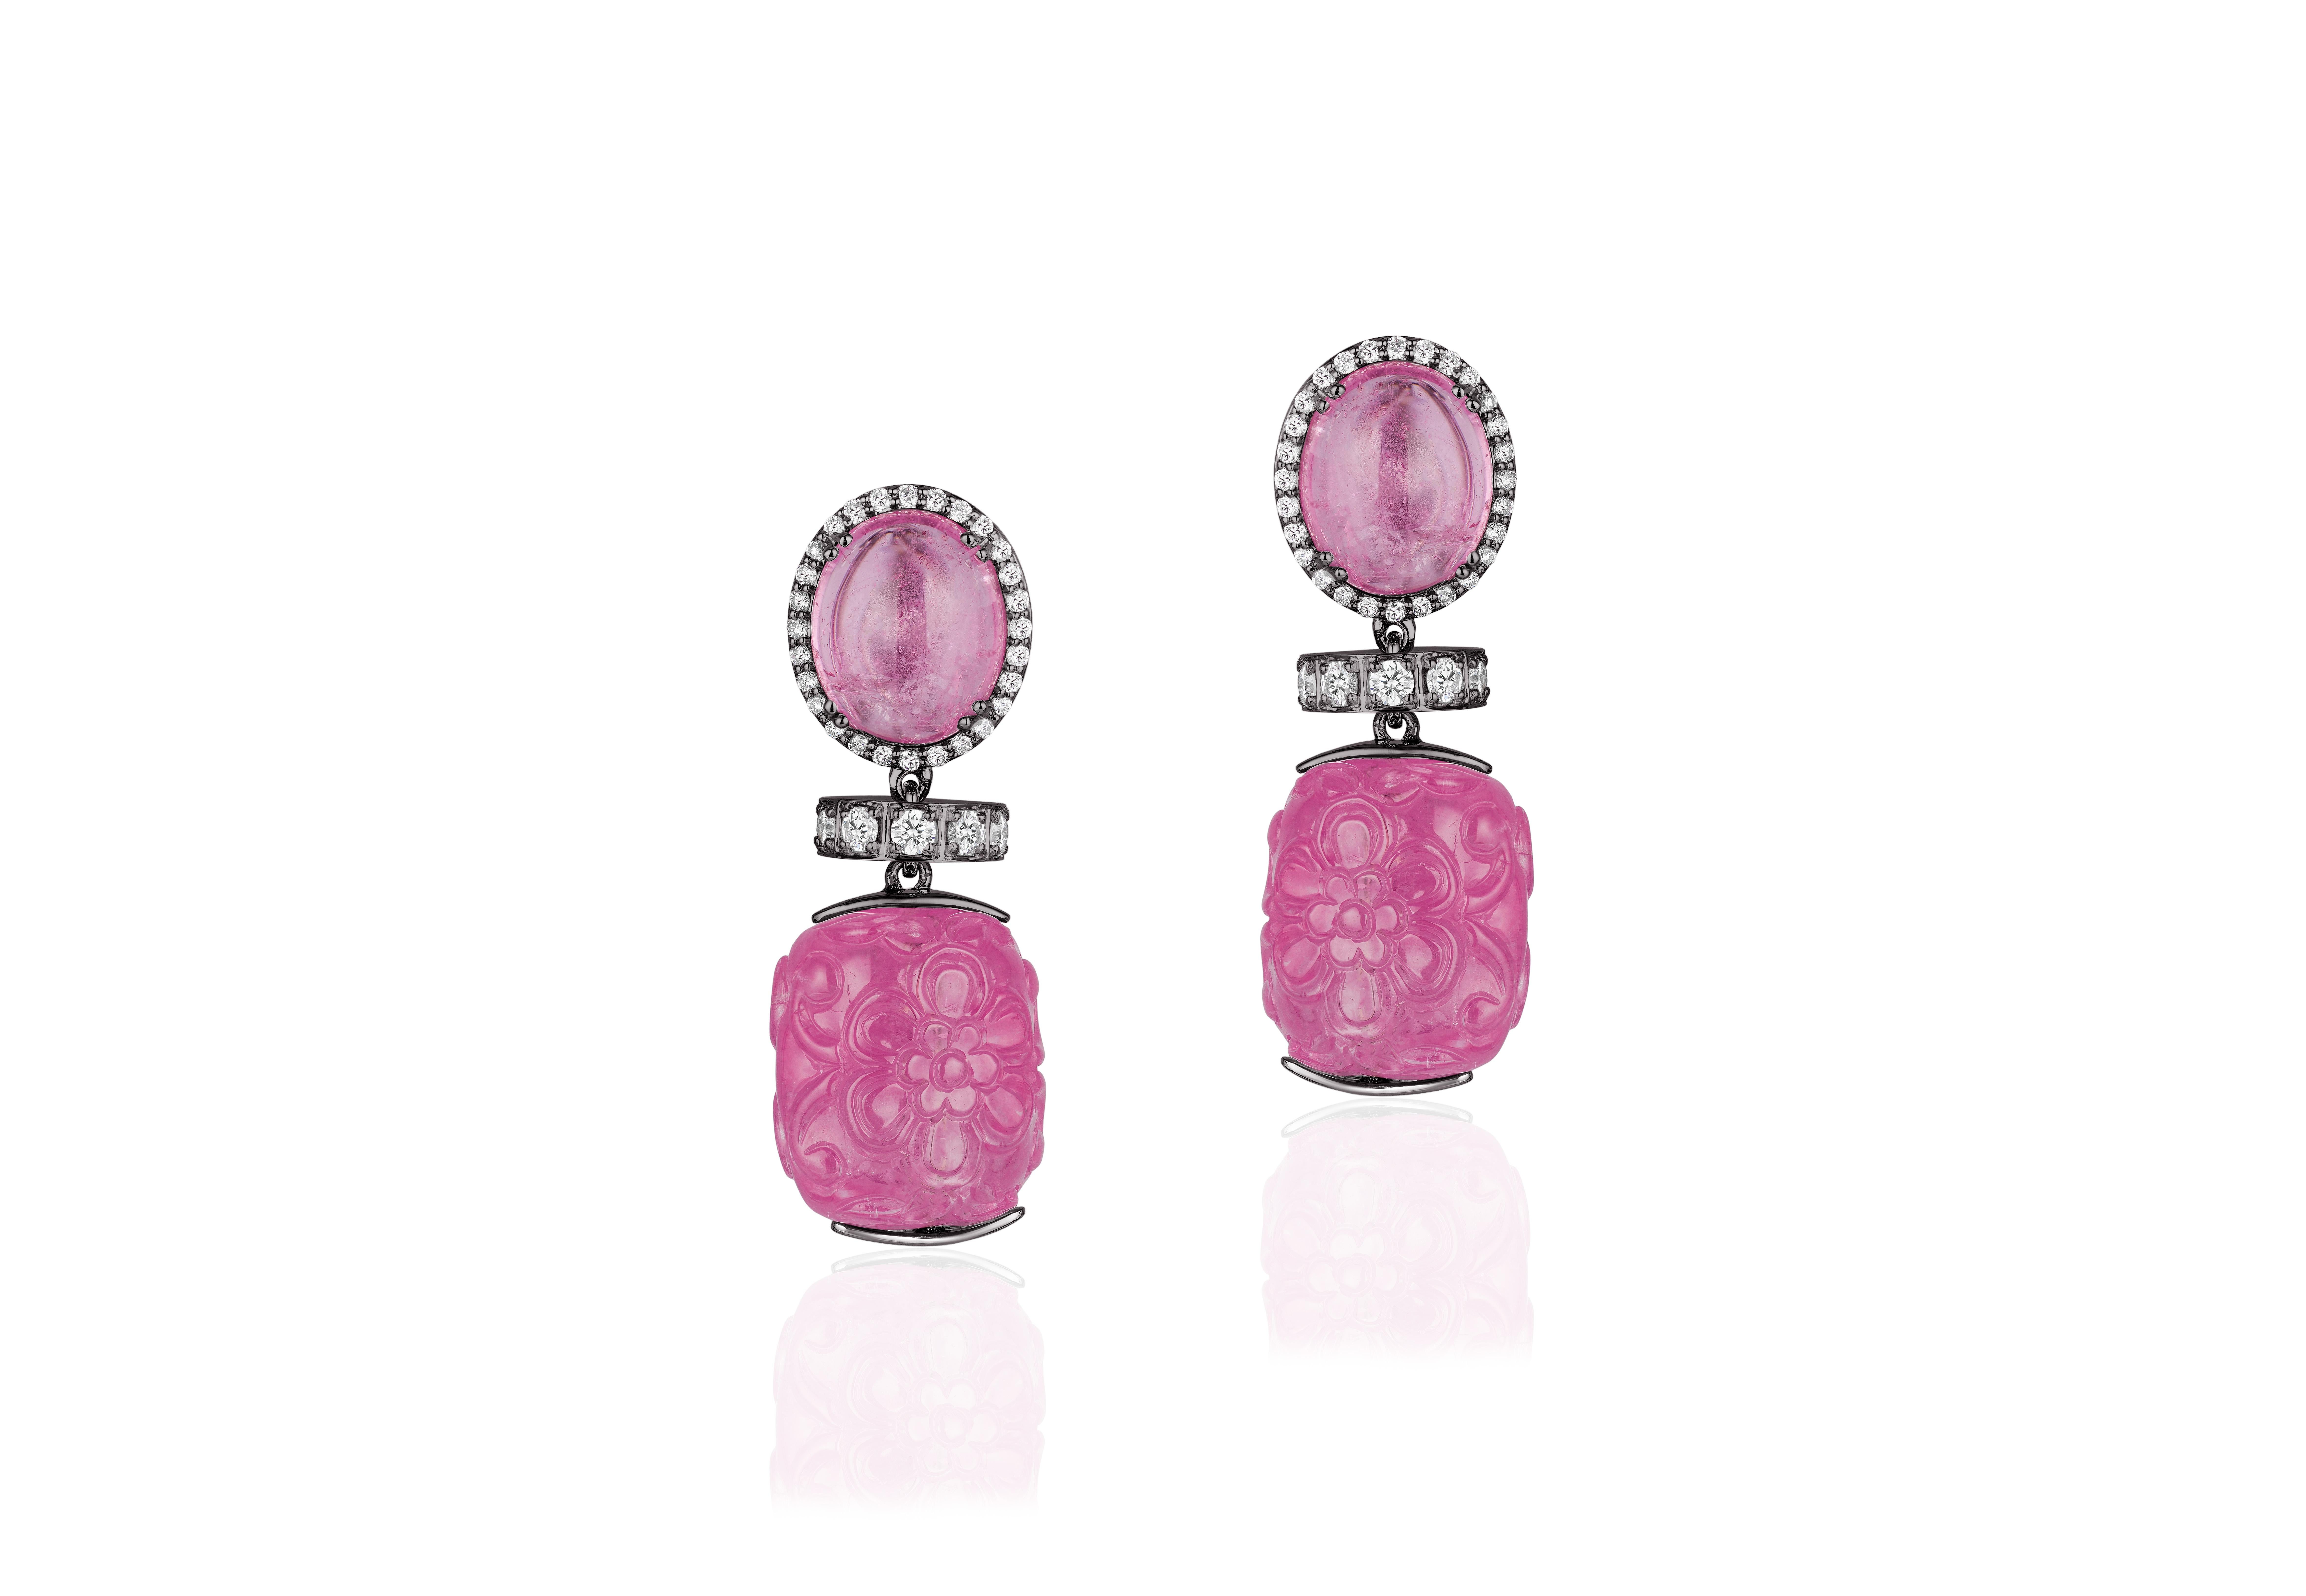 Carved Pink Tourmaline Earrings with Diamonds in 18k White Gold, from 'G-One' Collection

Gemstone Weight: Tourmaline- 62.15 Carats

Diamond: G-H / VS, Approx Wt: 1.28 Carats